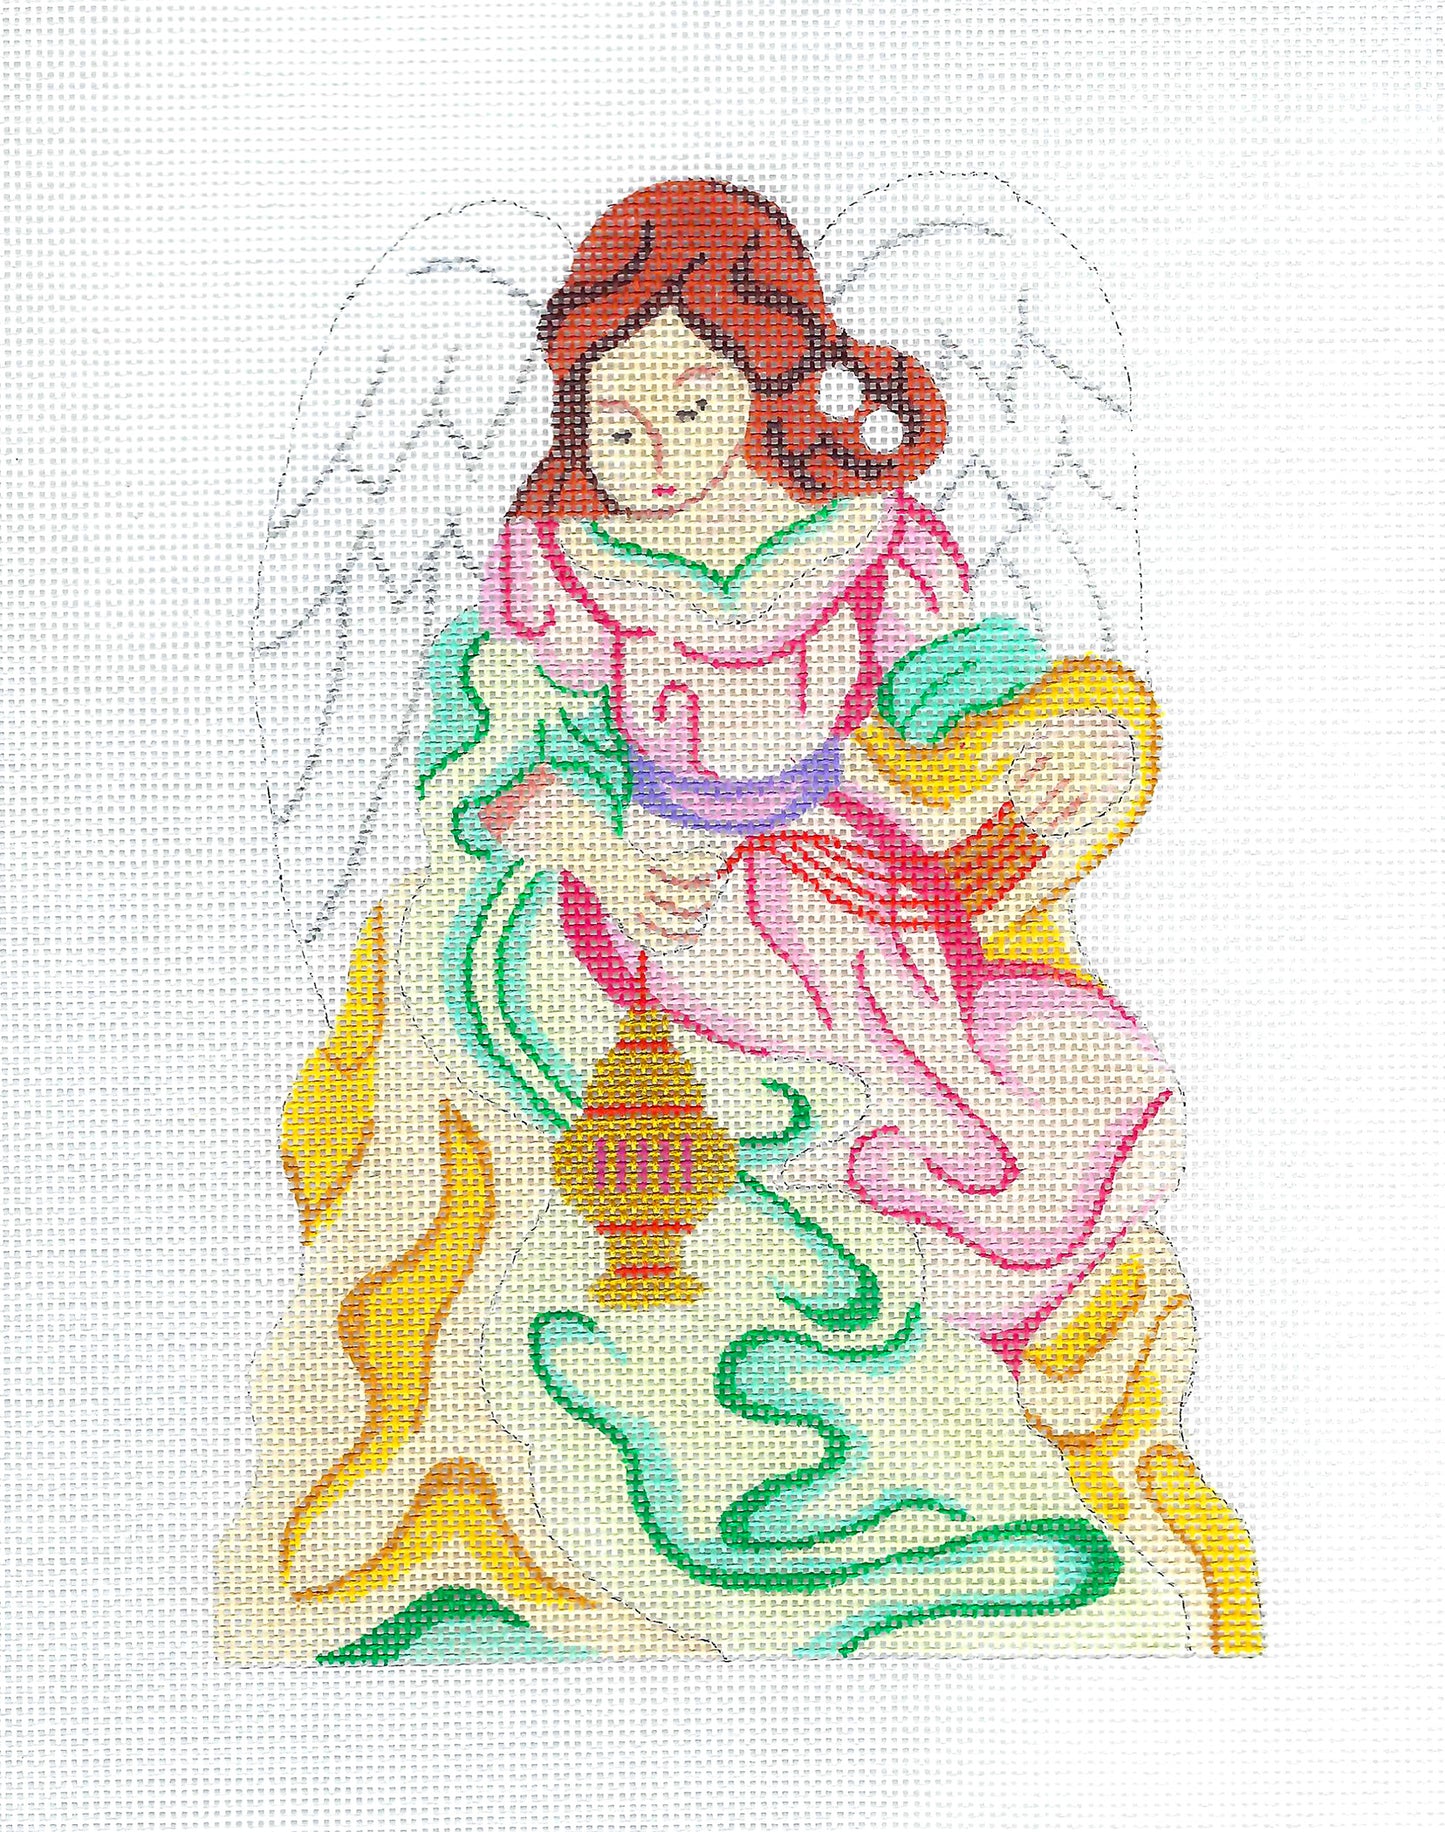 Christmas ~ Creche Angel for the Nativity handpainted Needlepoint Canvas by Silver Needle